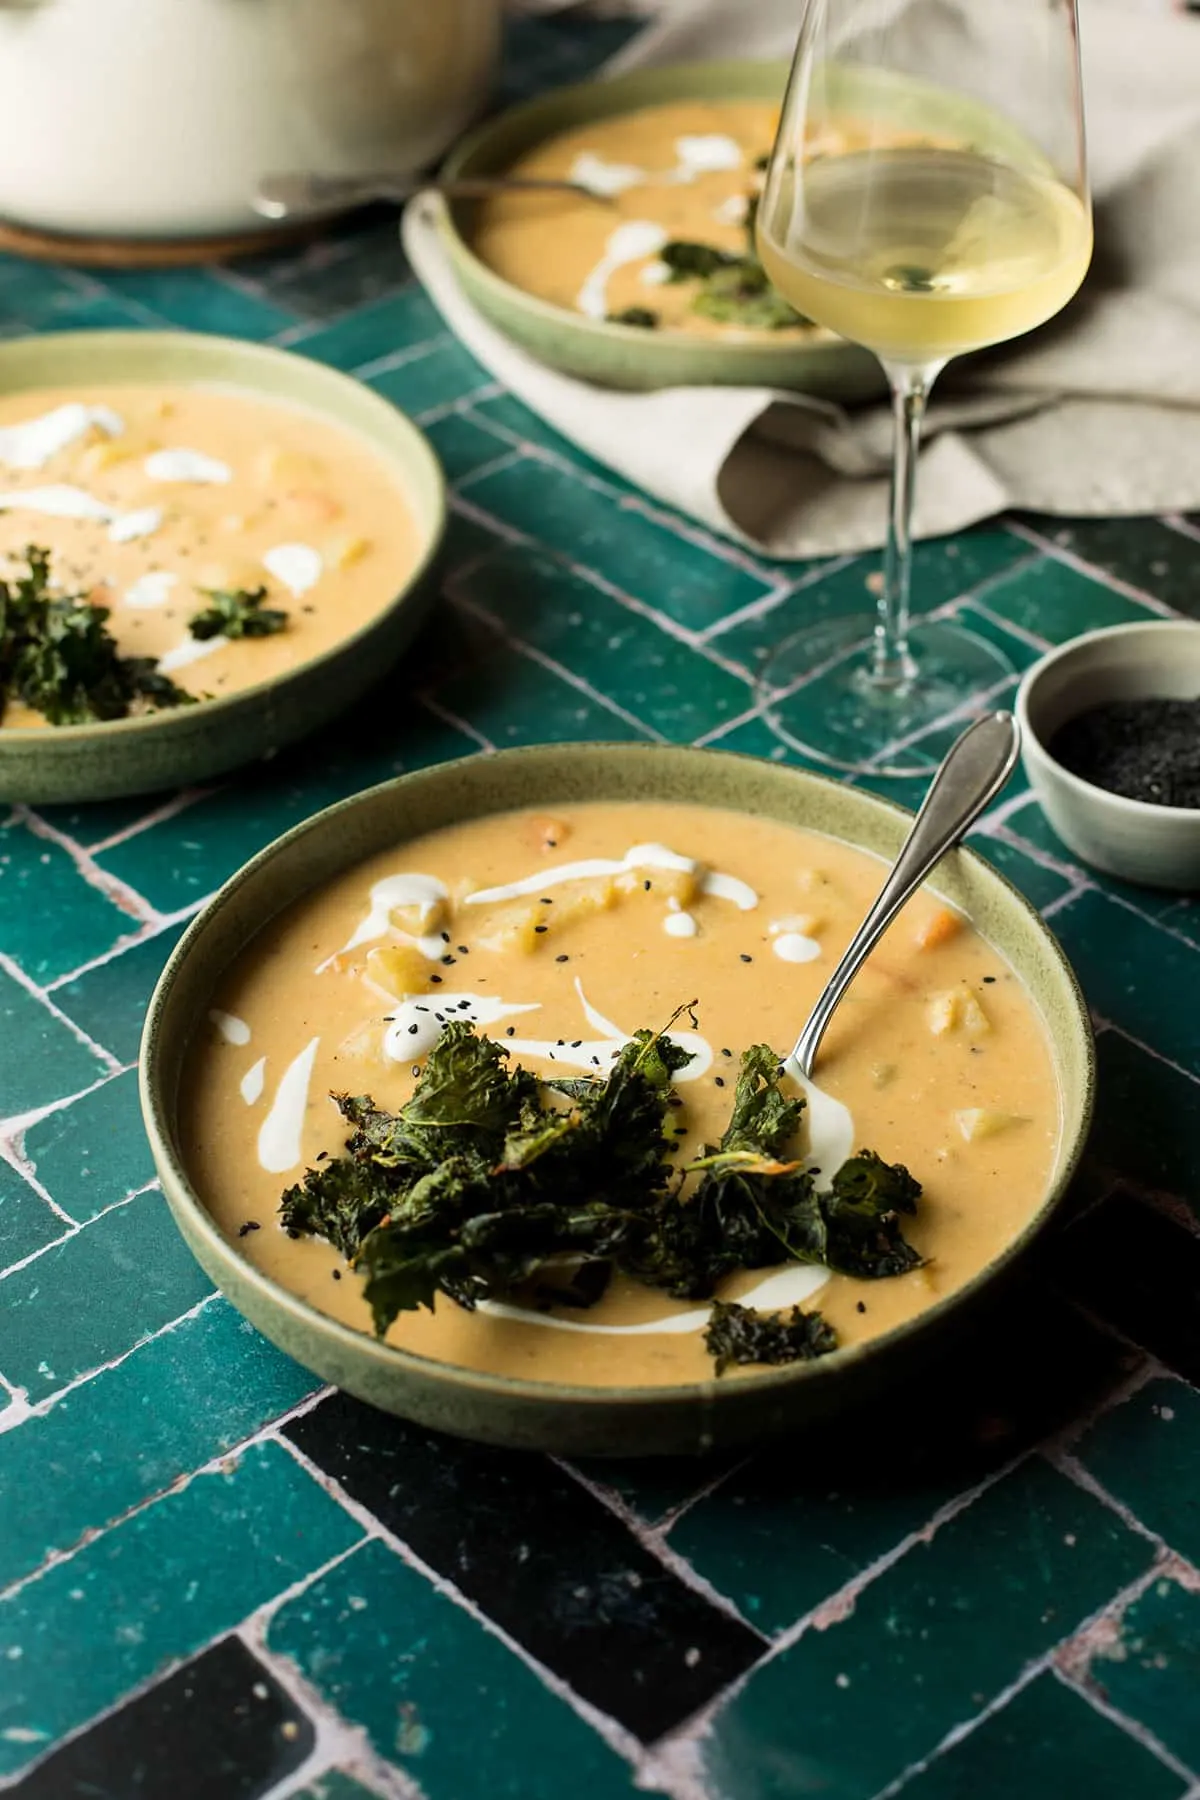 A shallow bowl of potato and carrot soup with kale chips.